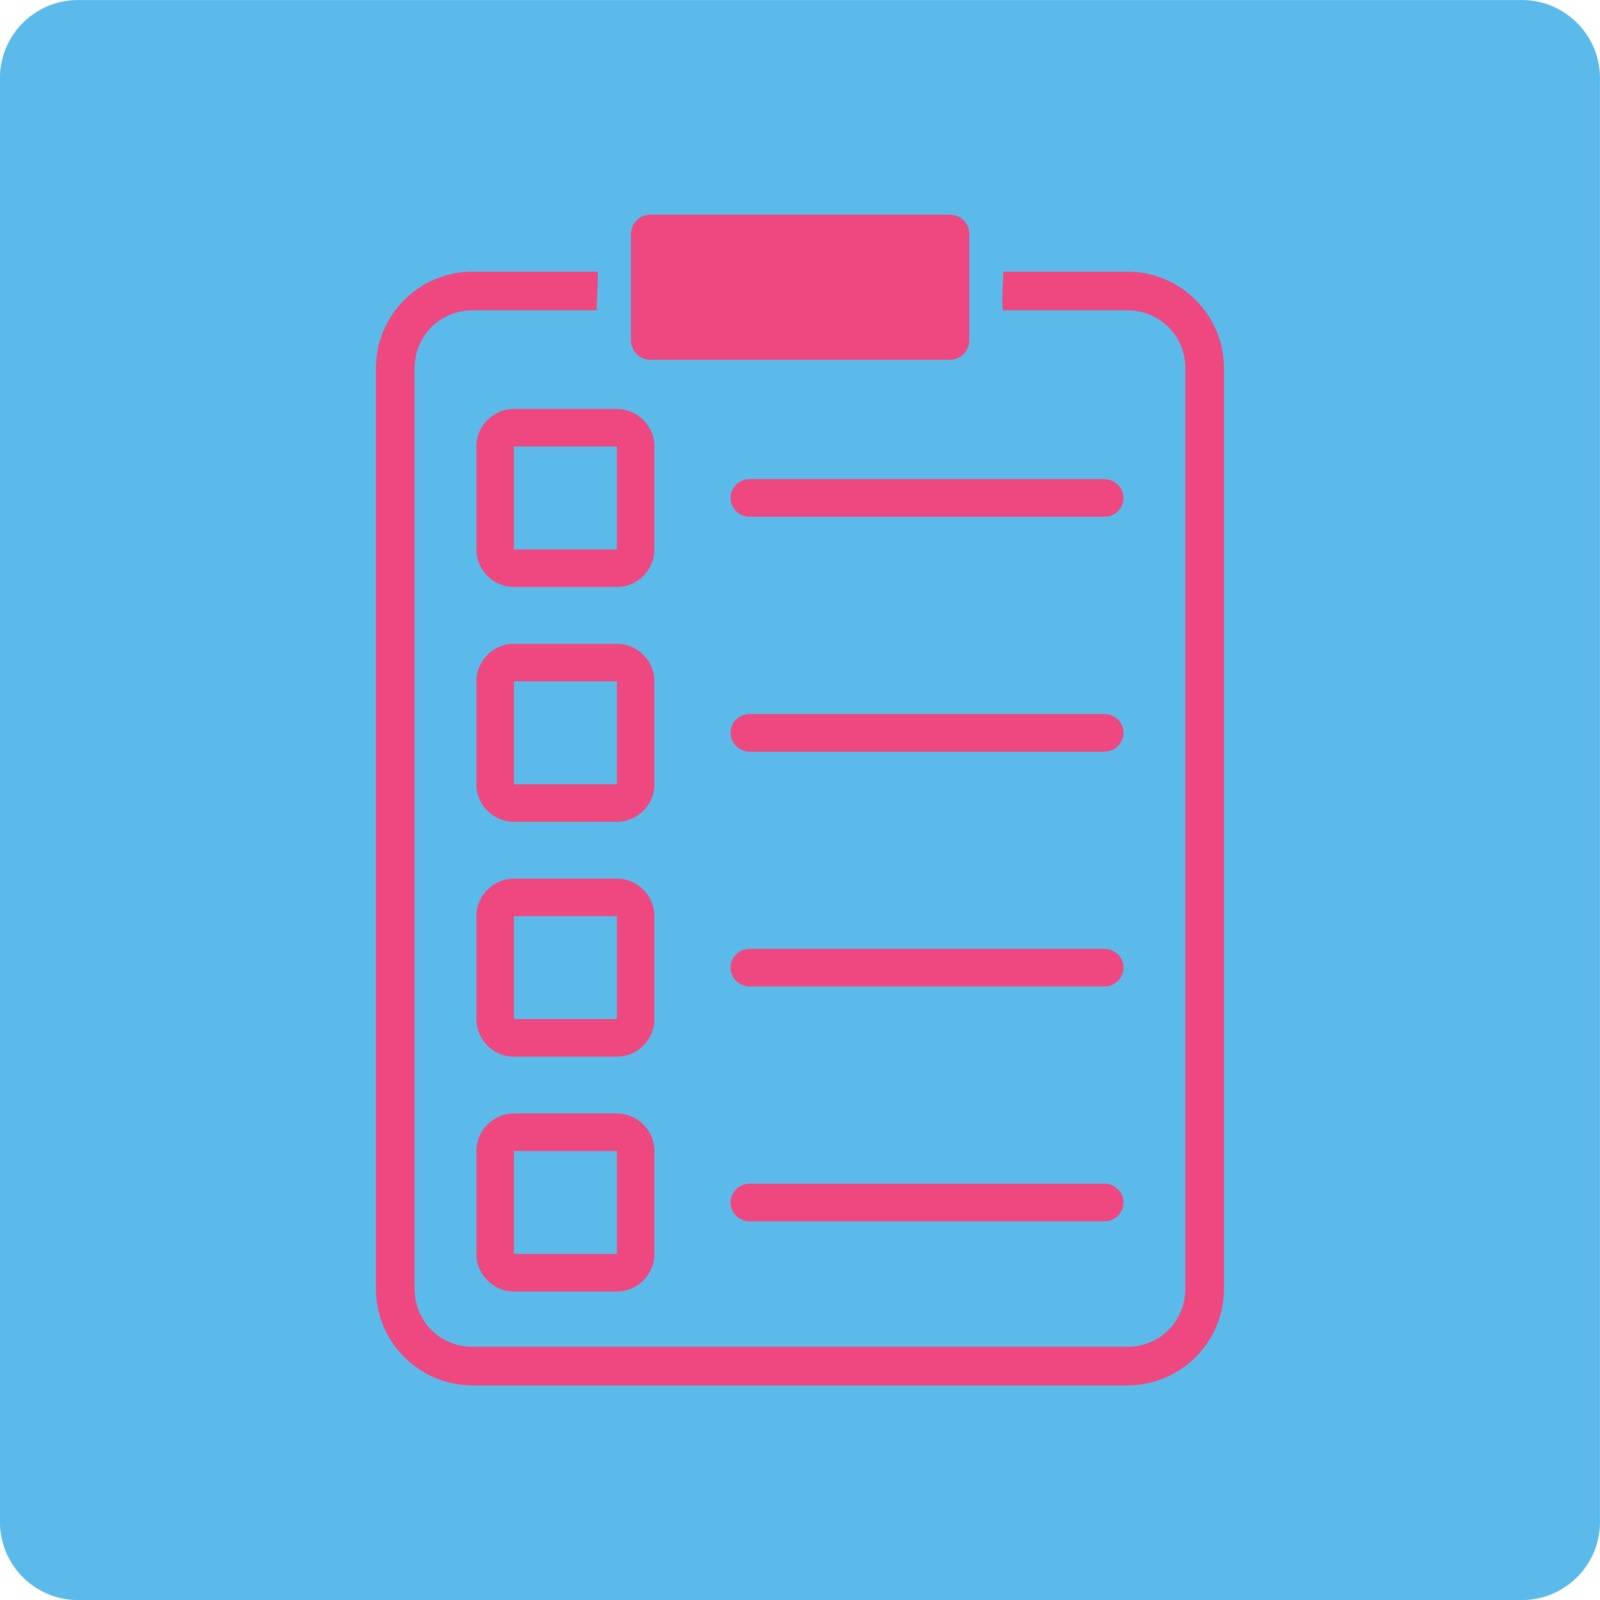 Examination icon. Vector style is pink and blue colors, flat rounded square button on a white background.